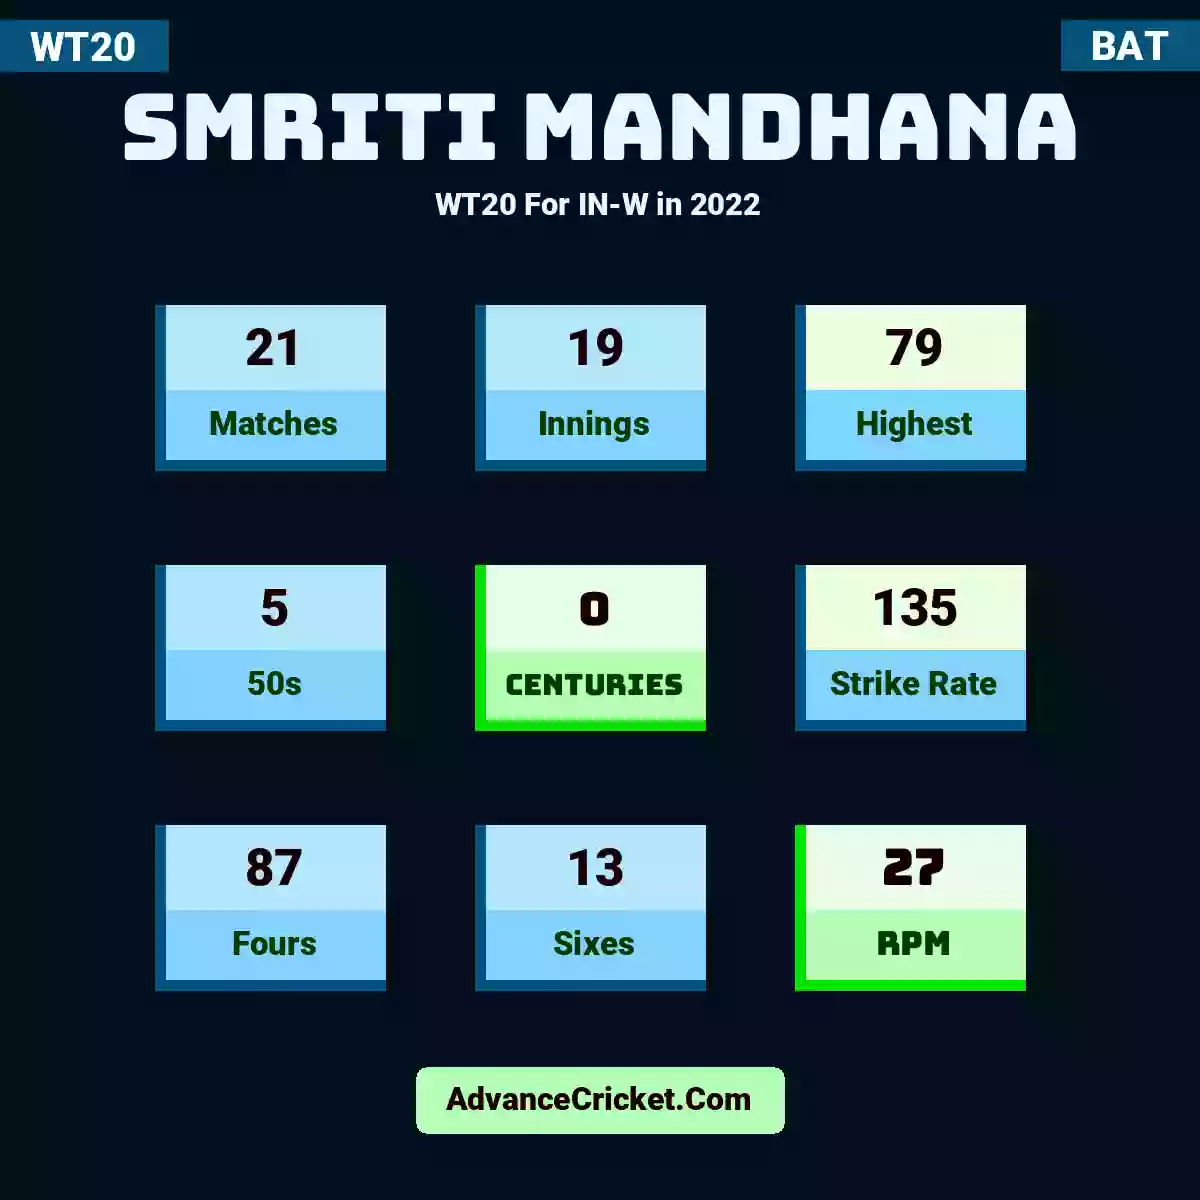 Smriti Mandhana WT20  For IN-W in 2022, Smriti Mandhana played 21 matches, scored 79 runs as highest, 5 half-centuries, and 0 centuries, with a strike rate of 135. S.Mandhana hit 87 fours and 13 sixes, with an RPM of 27.